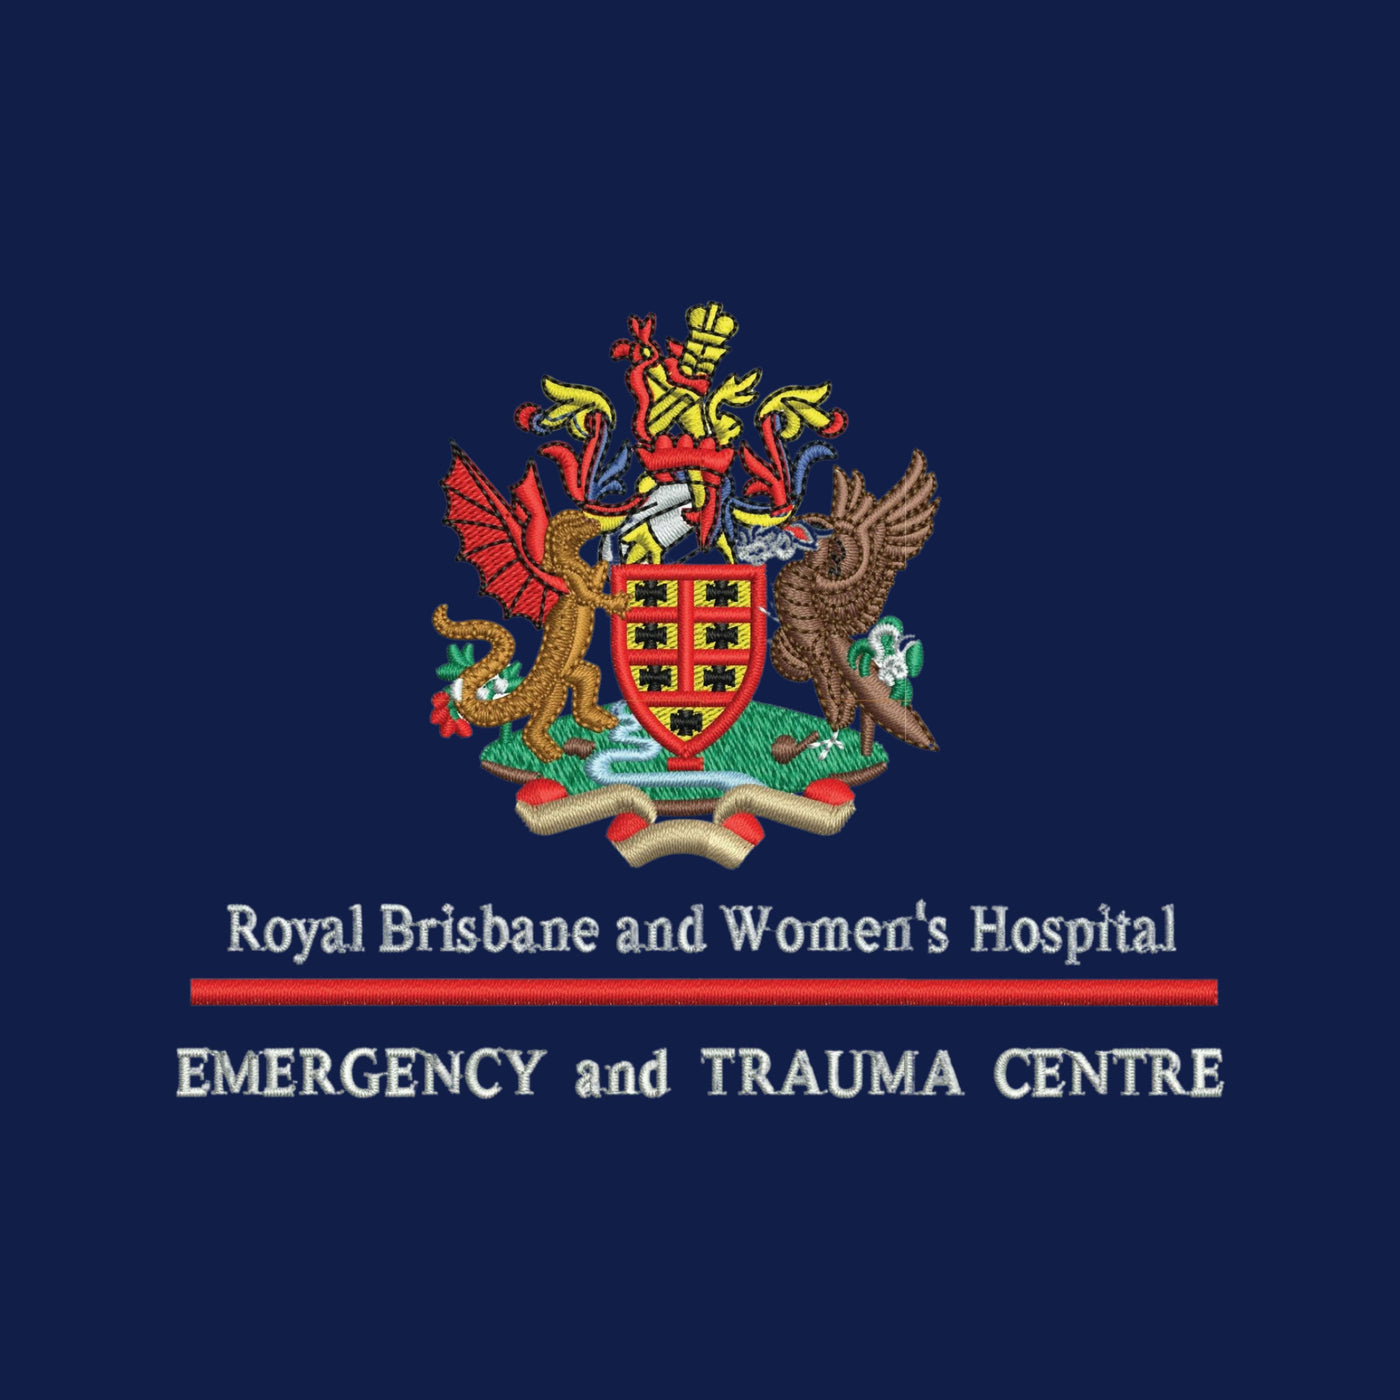 Embroidery Stock Logos - Royal Brisbane and Women's Hospital Emergency and Trauma Centre